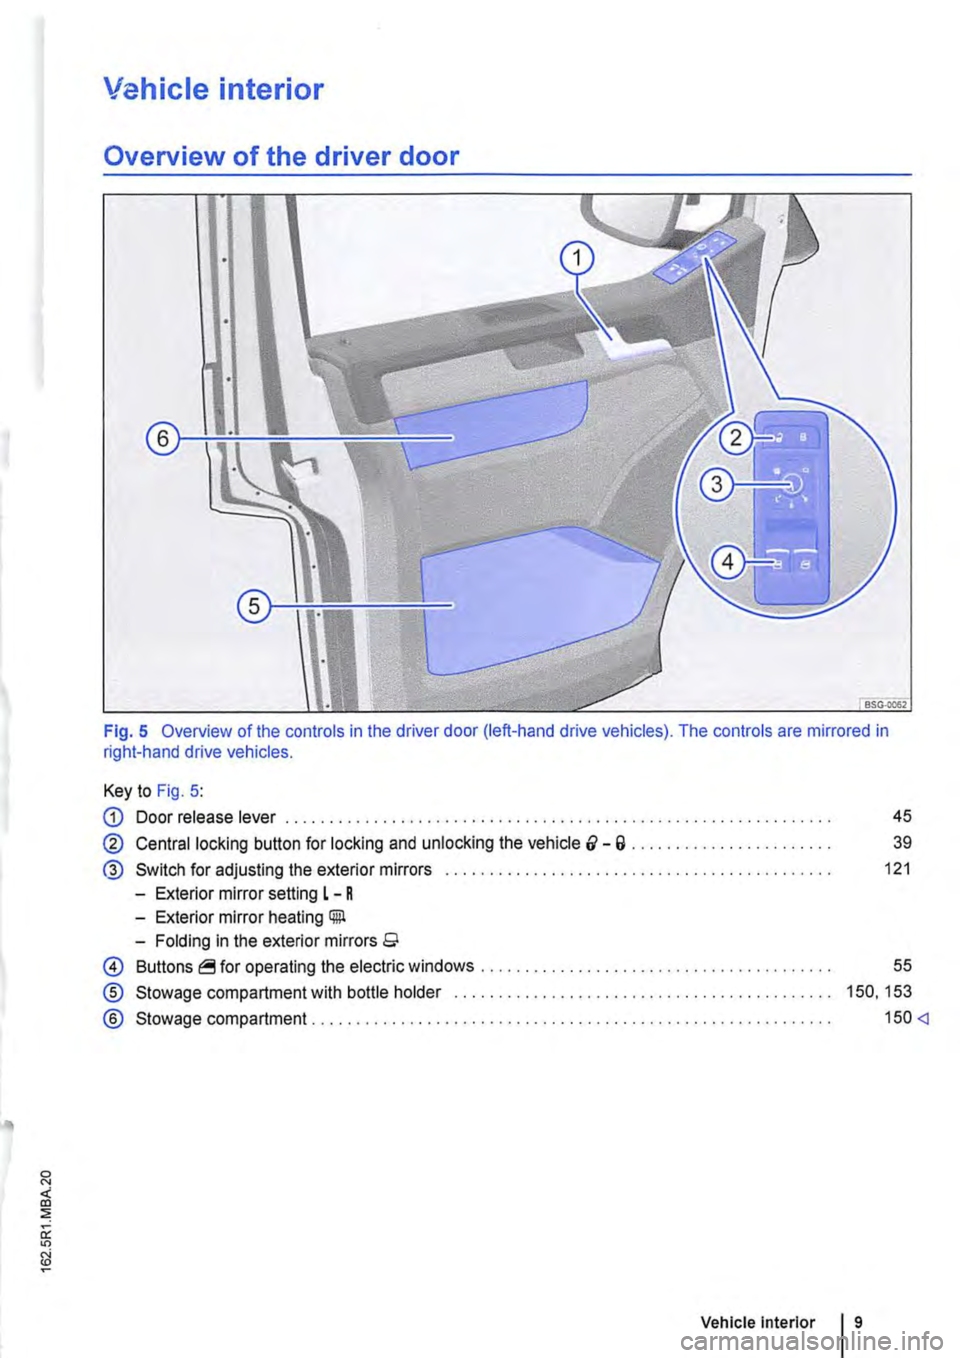 VOLKSWAGEN TRANSPORTER 2011  Owners Manual Vehicle interior 
Overview of the driver door 
Fig. 5 Overview of the controls in the driver door (left-hand drive vehicles). The controls are mirrored in right-hand drive vehicles. 
Key to Fig. 5: 
G